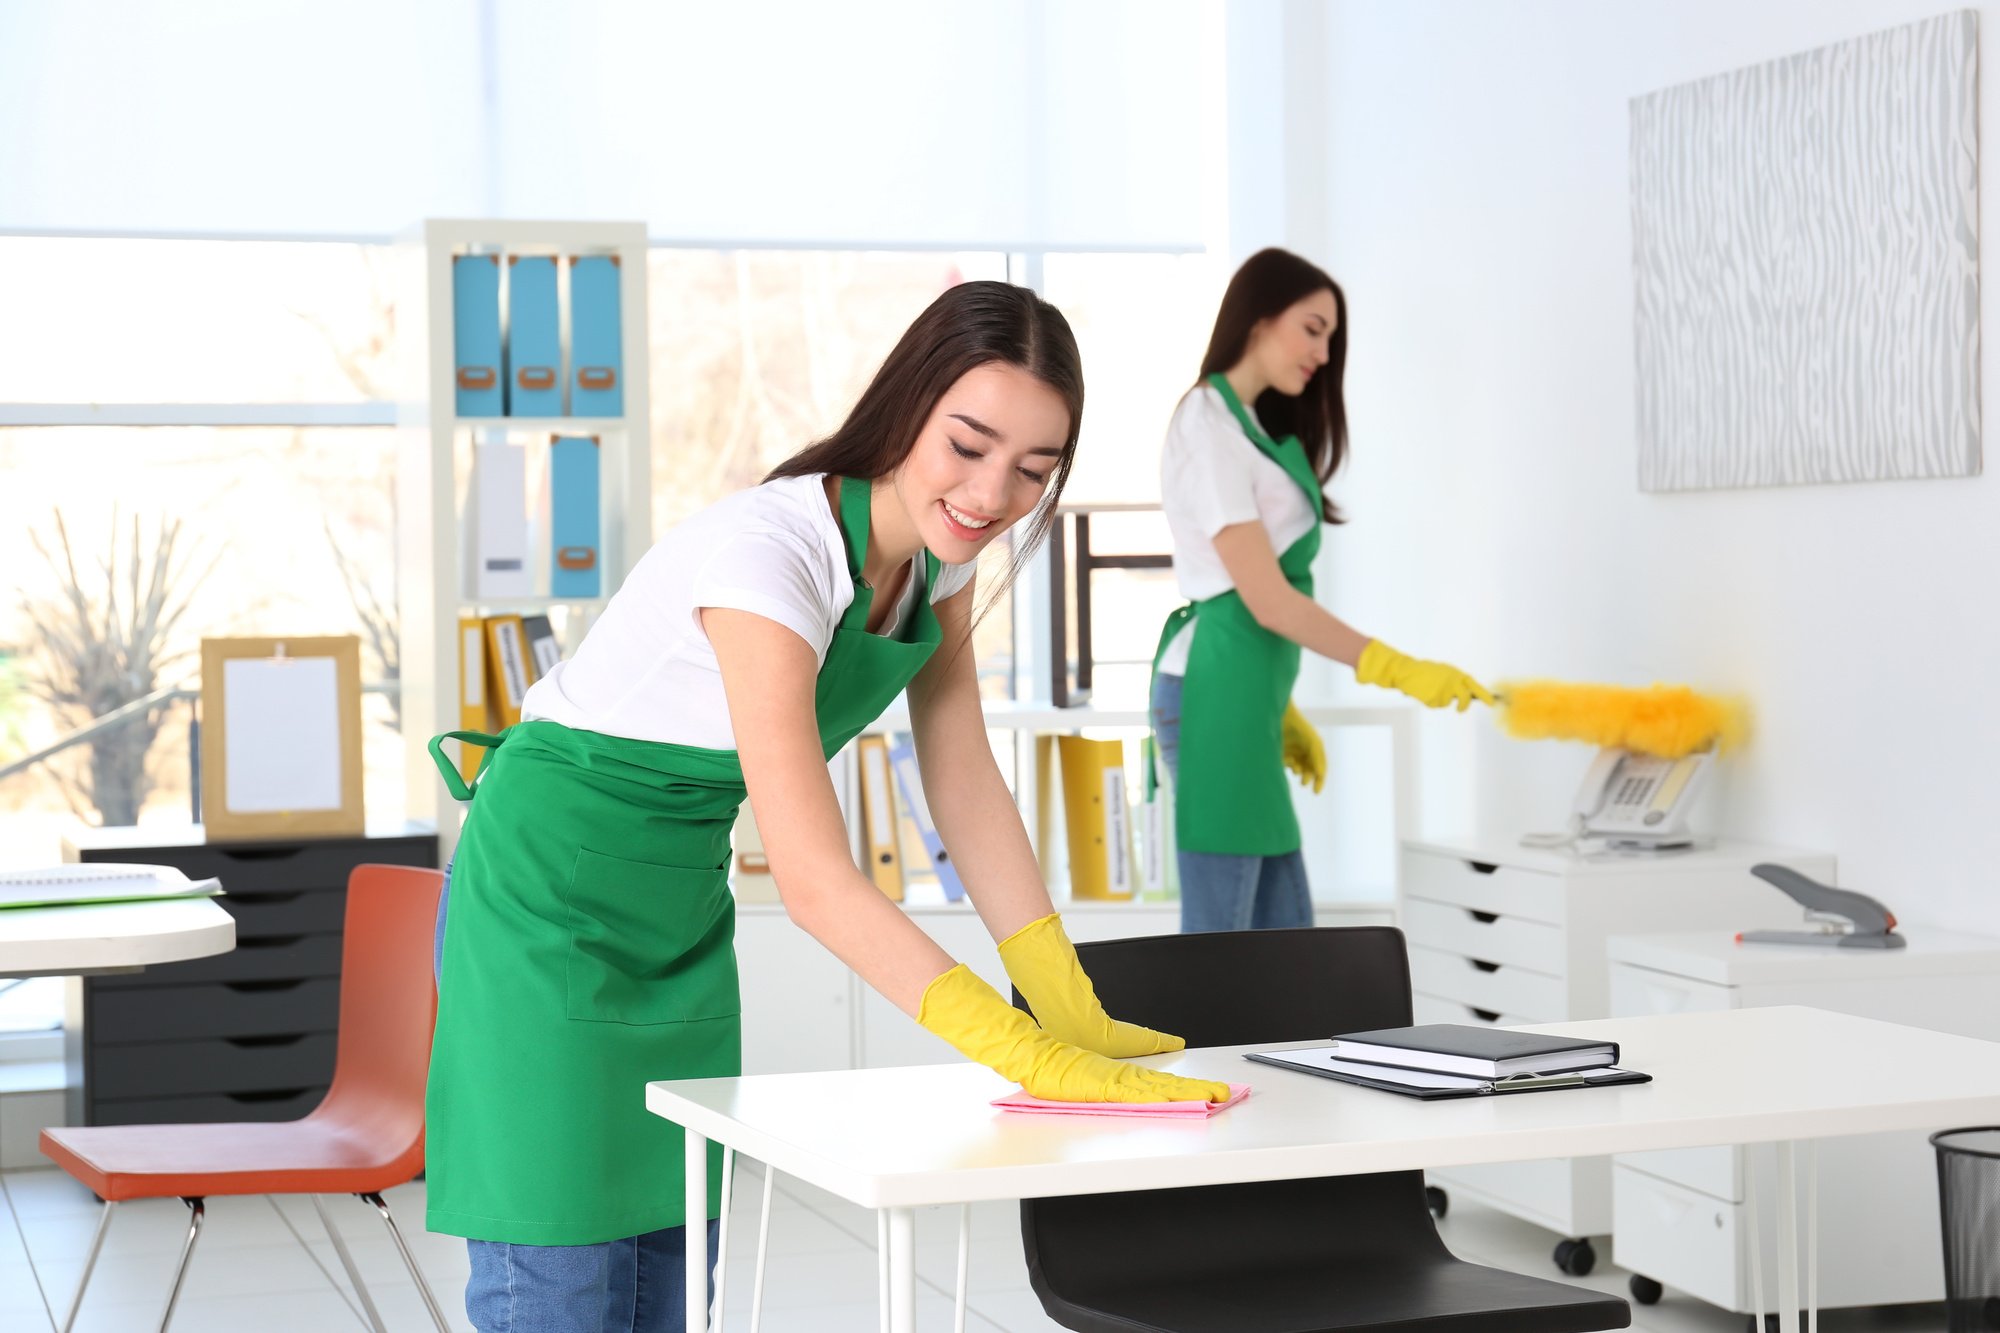 After a long day of work, leave the commercial cleaning to the professionals. Learn why you should hire office building cleaning services here.